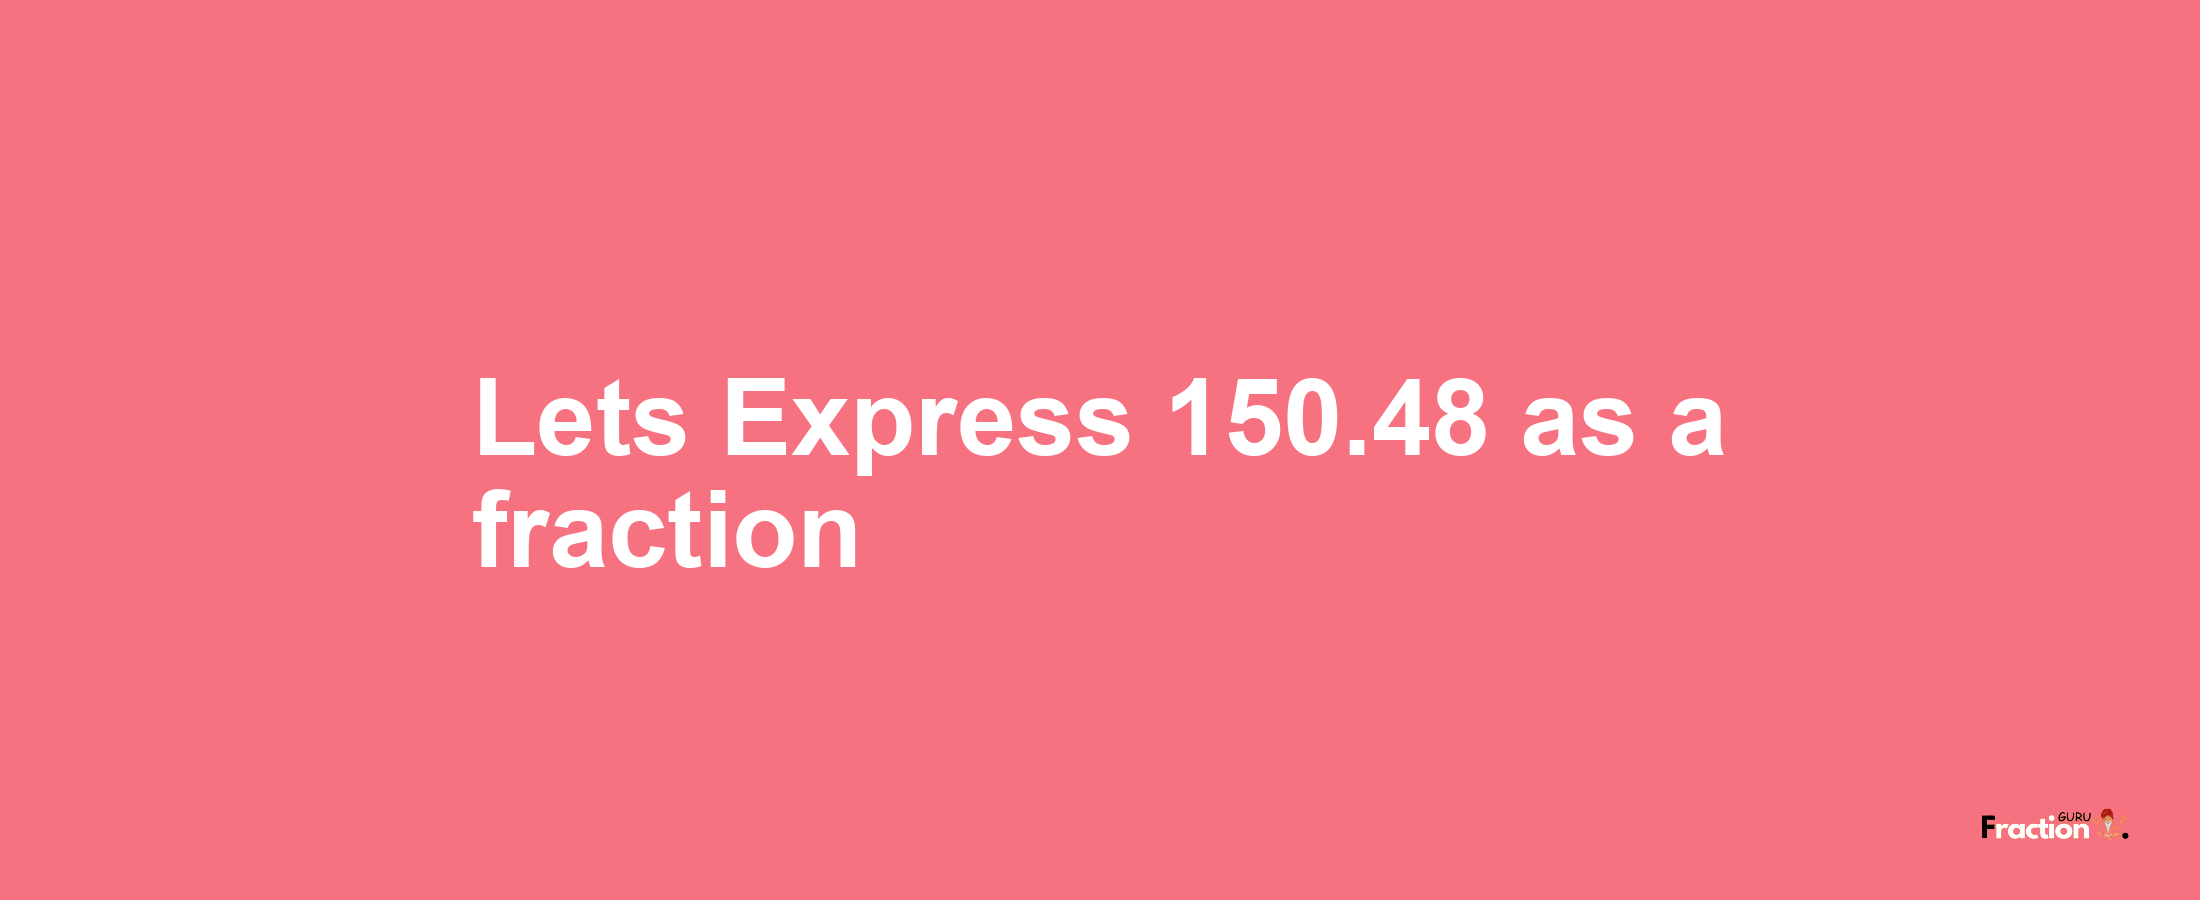 Lets Express 150.48 as afraction